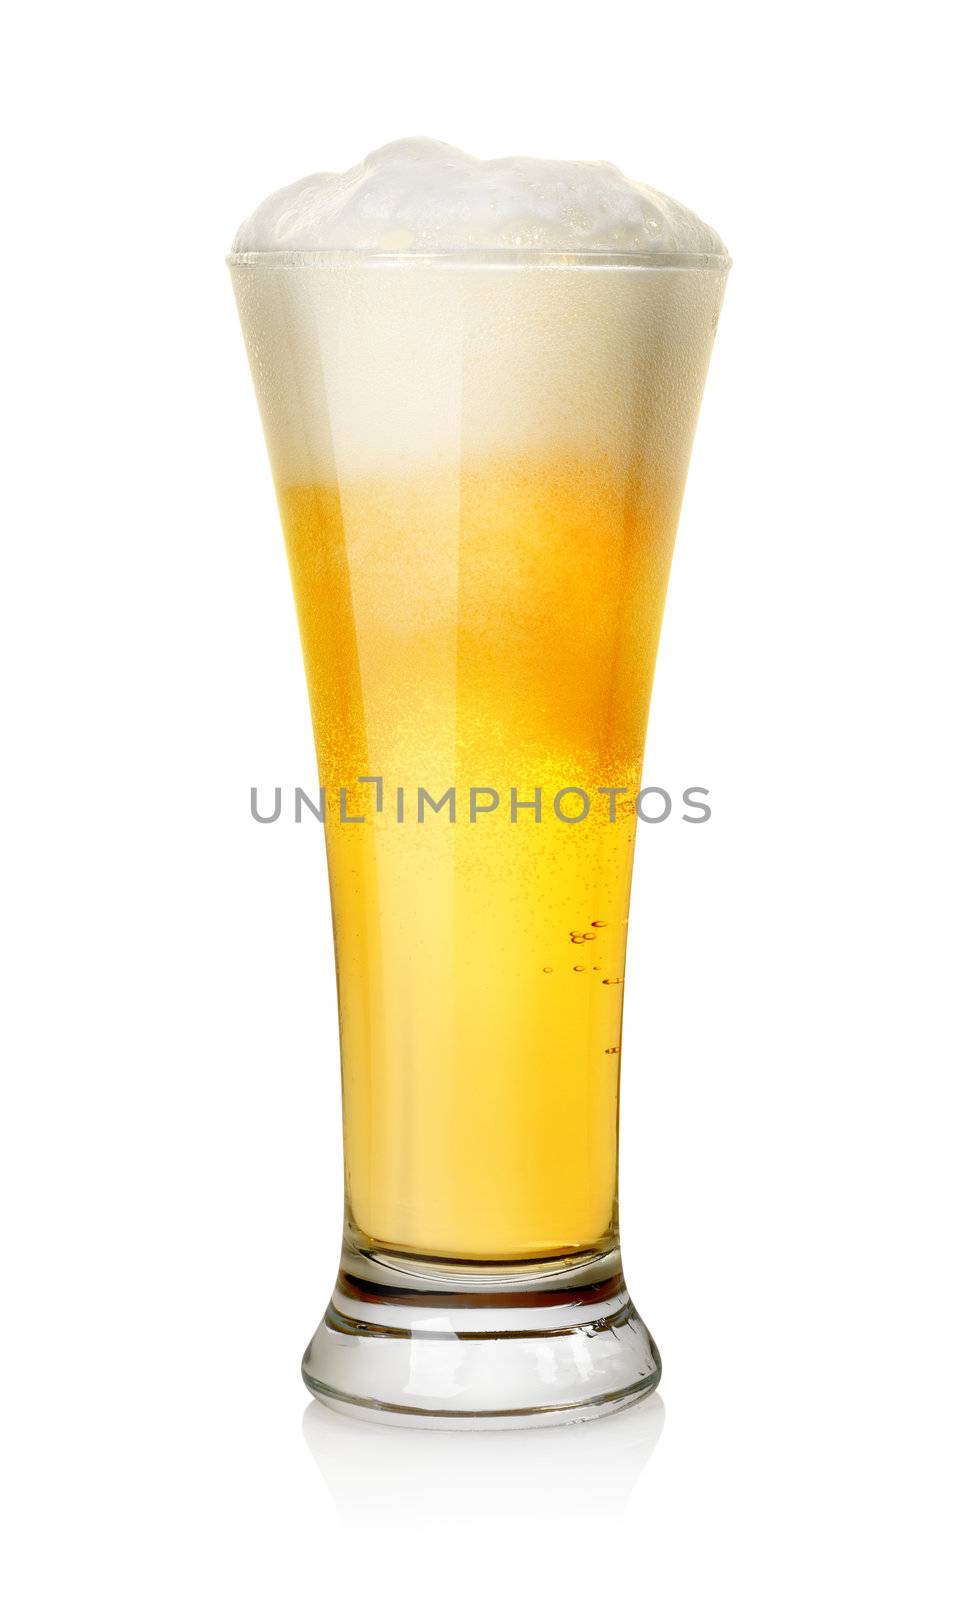 Glass of beer isolated on a white background. Clipping path